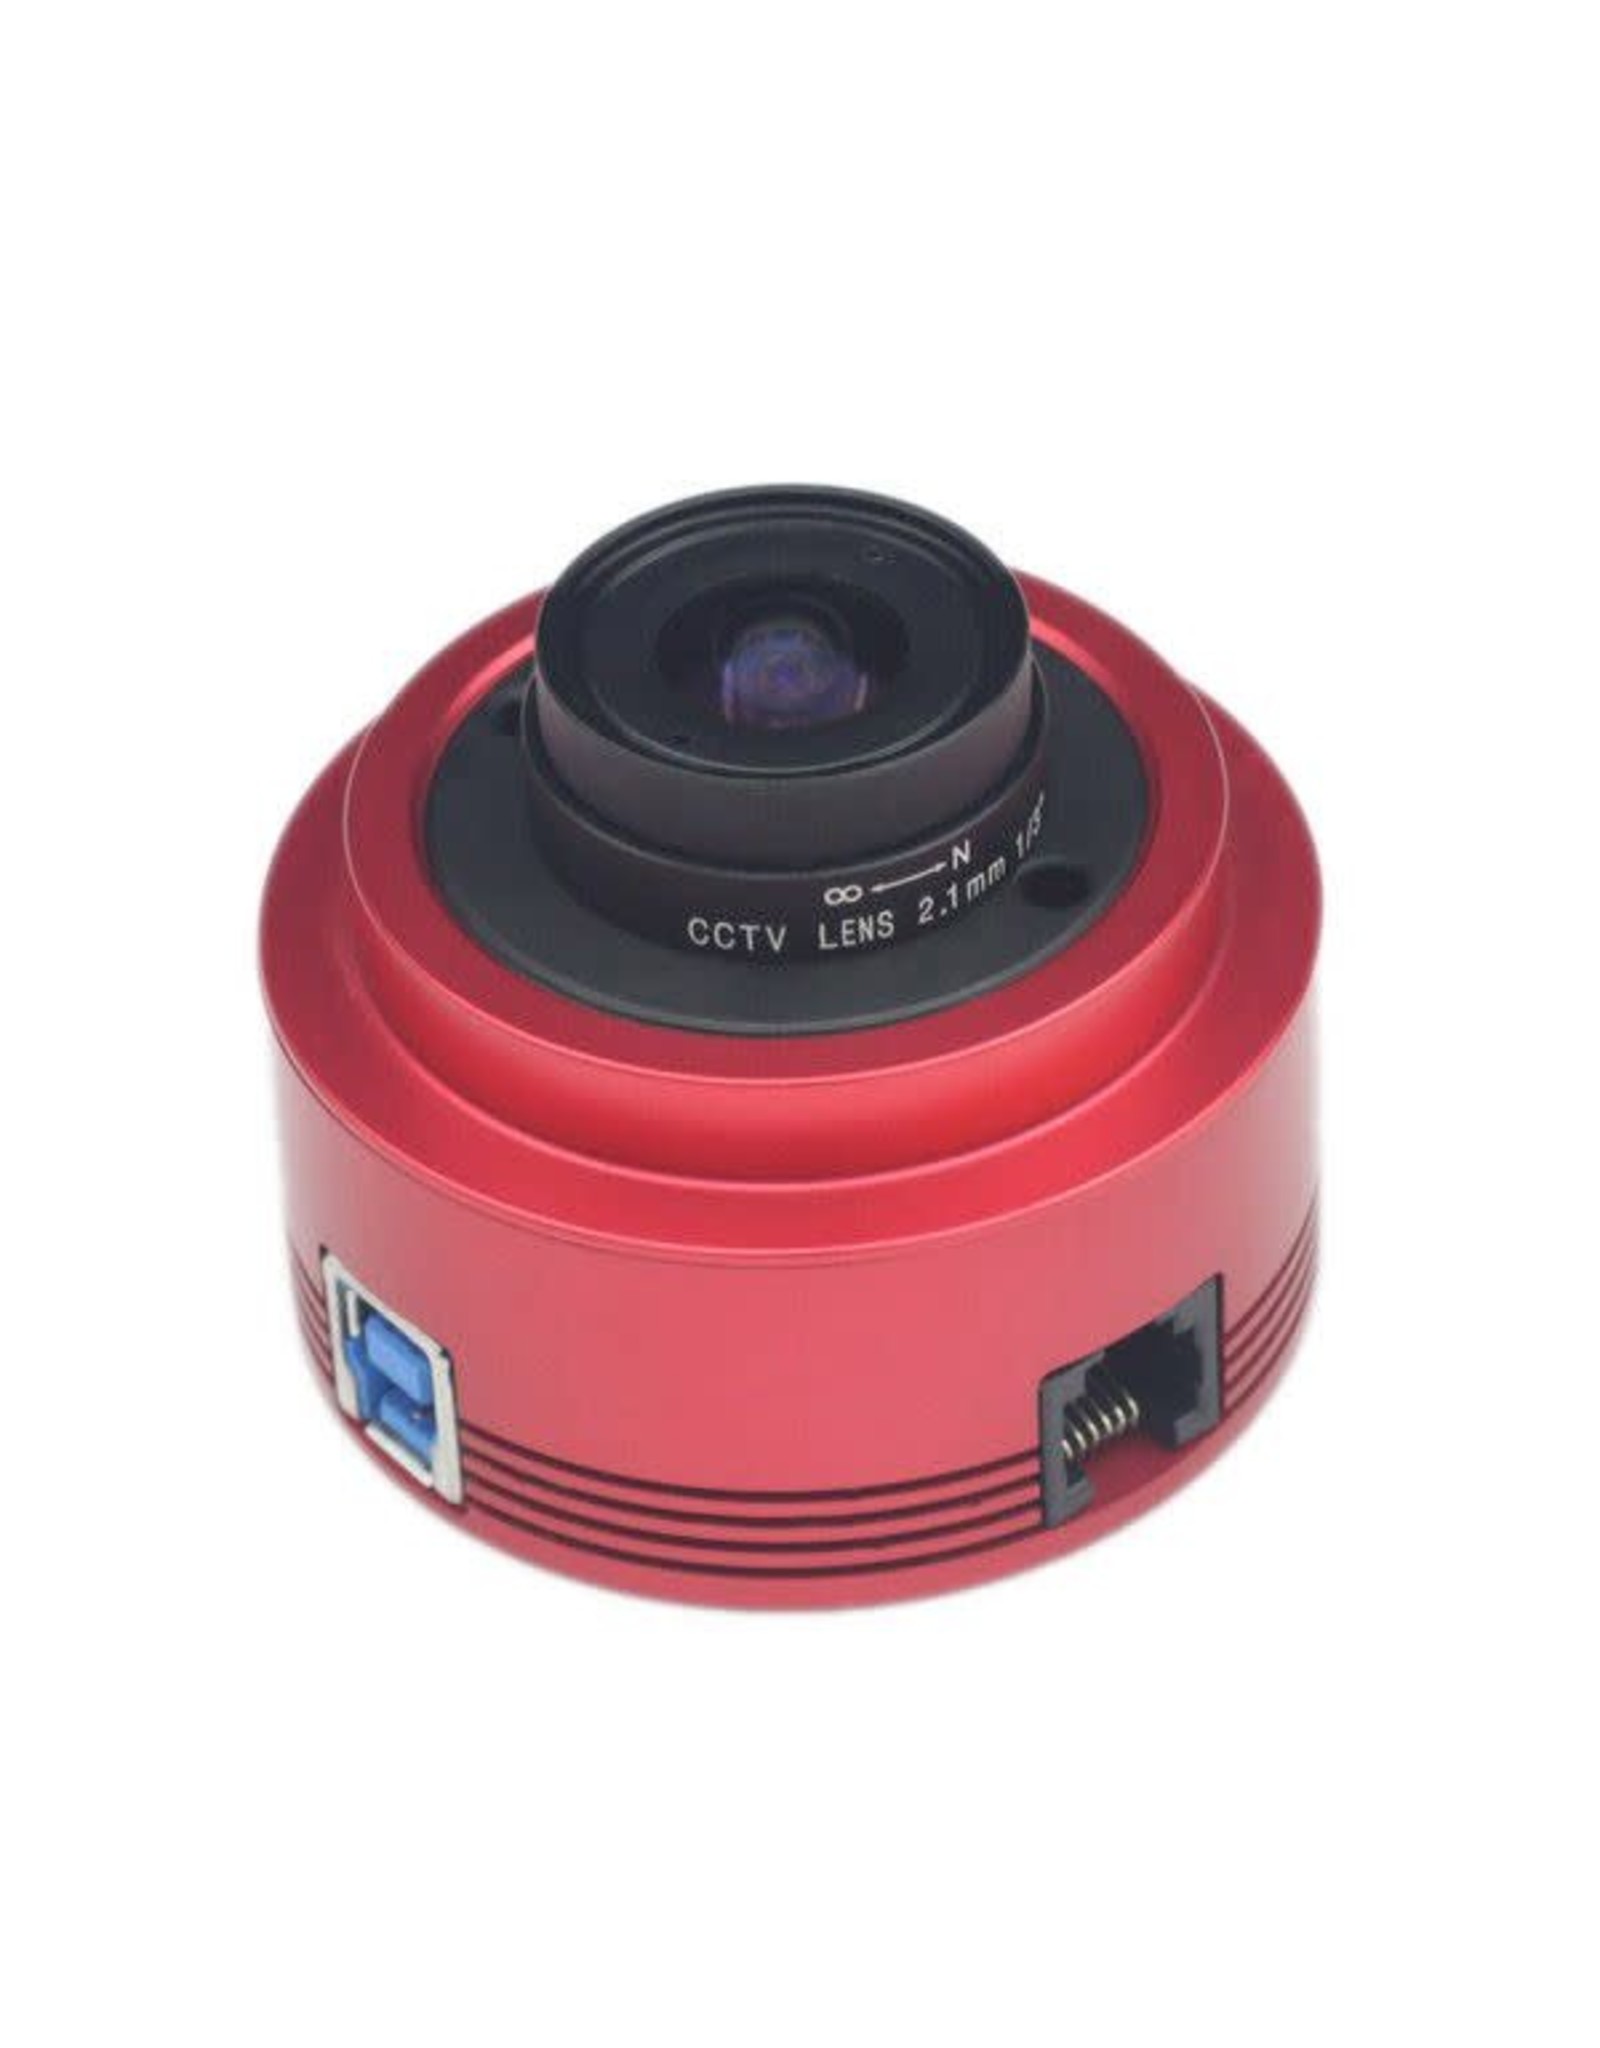 ZWO ZWO ASI224MC Color (3.75 microns) Astronomy Camera